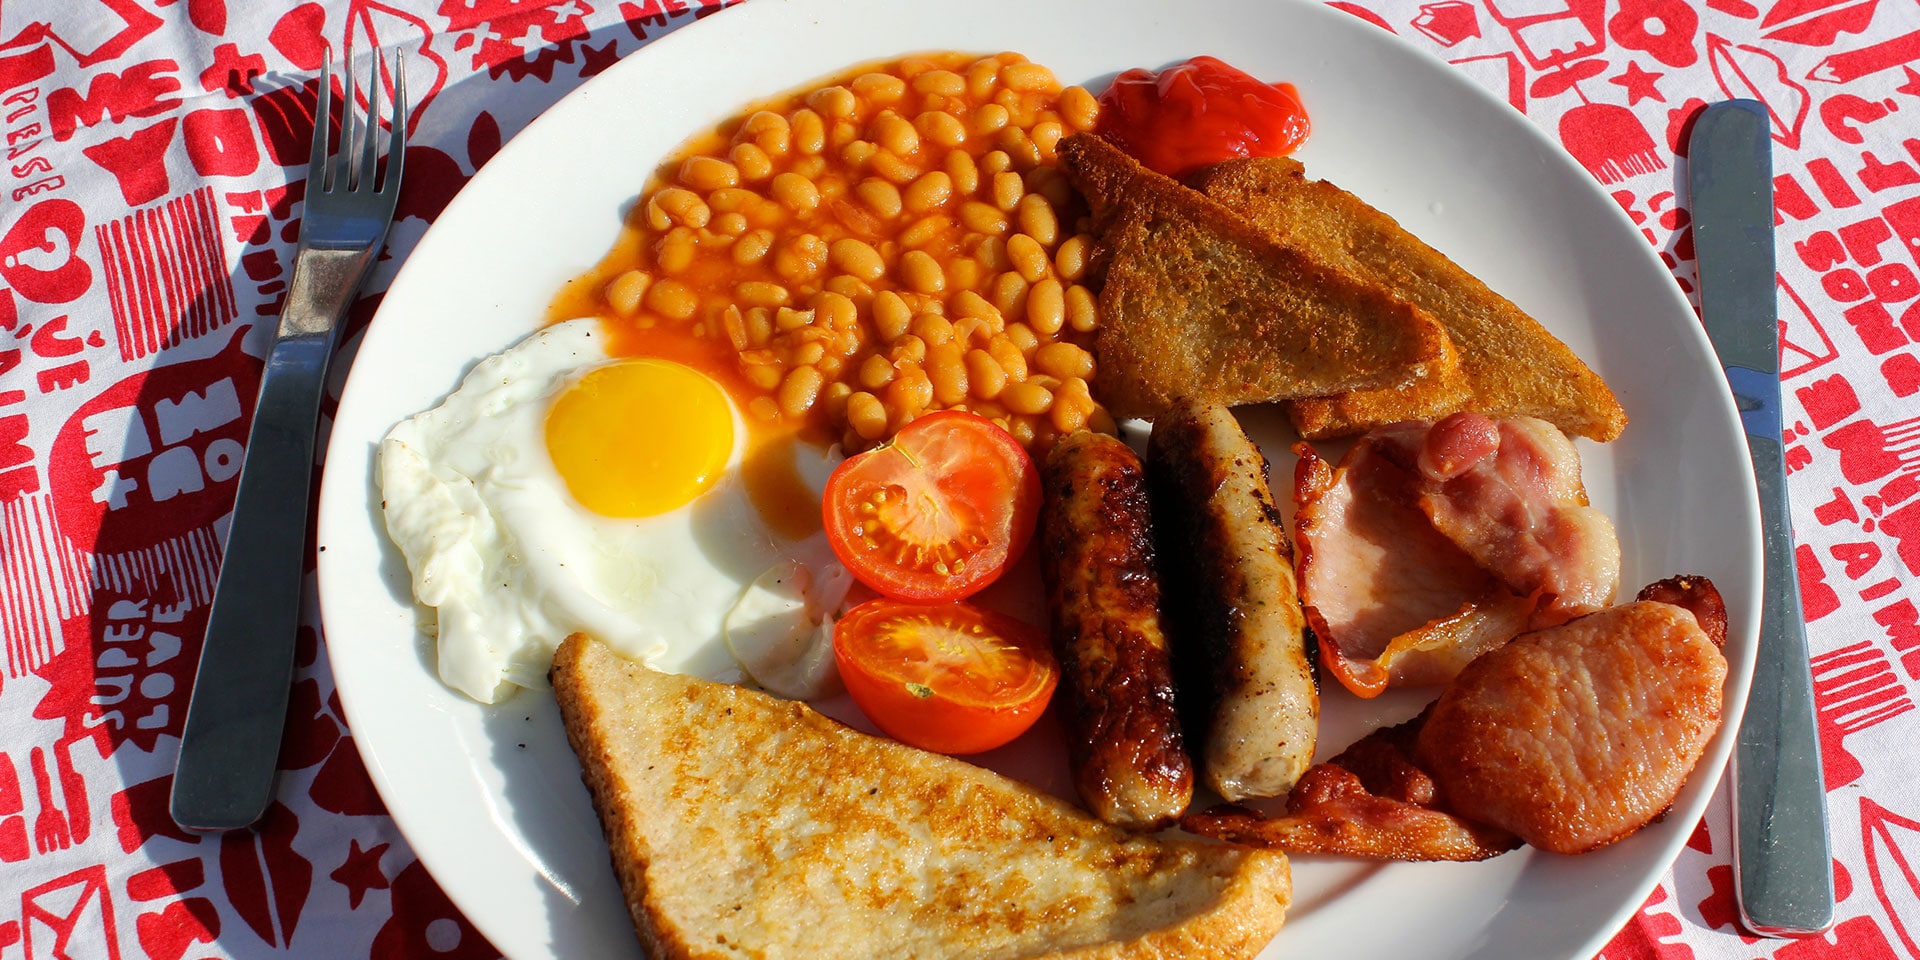 Where to Find the Perfect English Fry-Up in Manchester